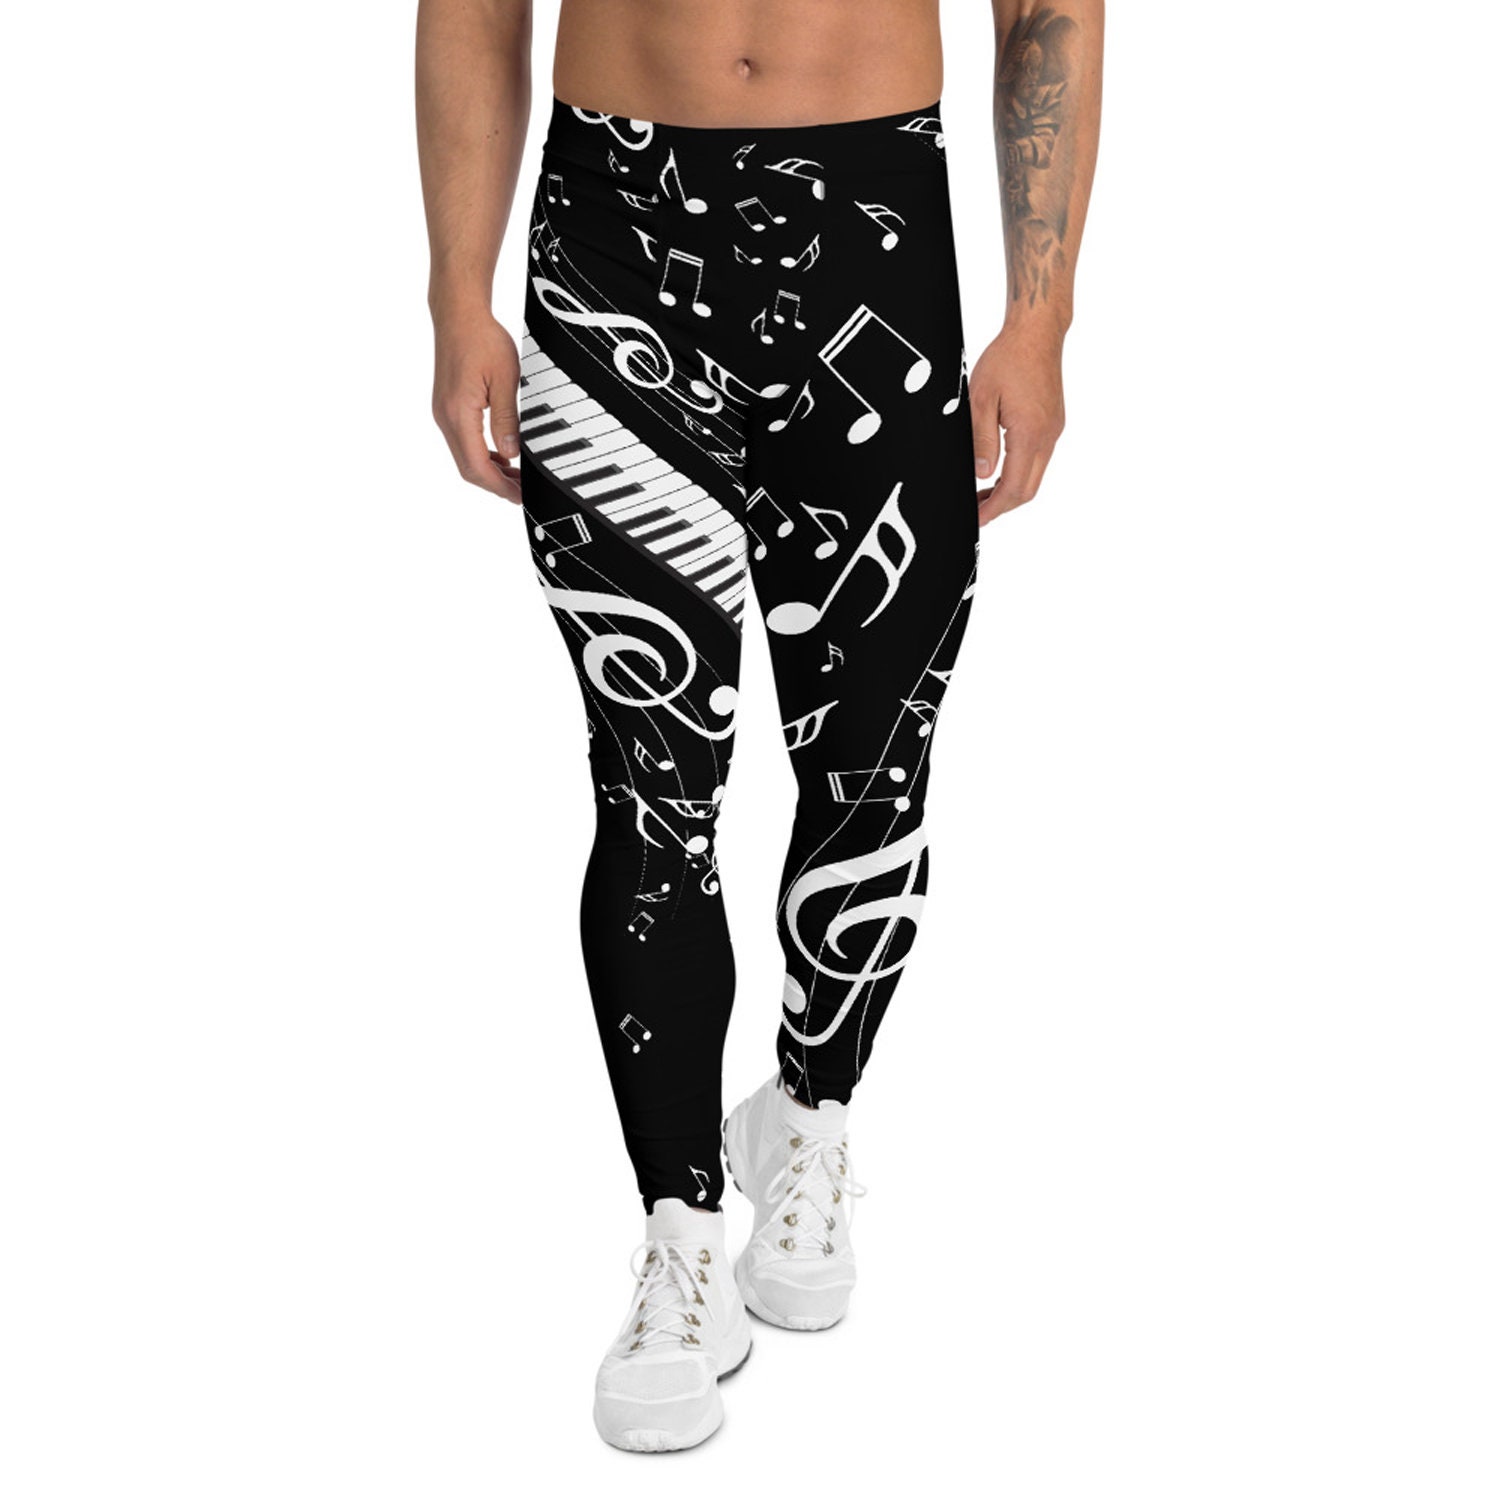 Buy Music Leggings for Men Black With Musical Notes Pattern Print Mid Waist  Full Length Mens Yoga Pants Perfect for Running, Workouts, Crossfit Online  in India 